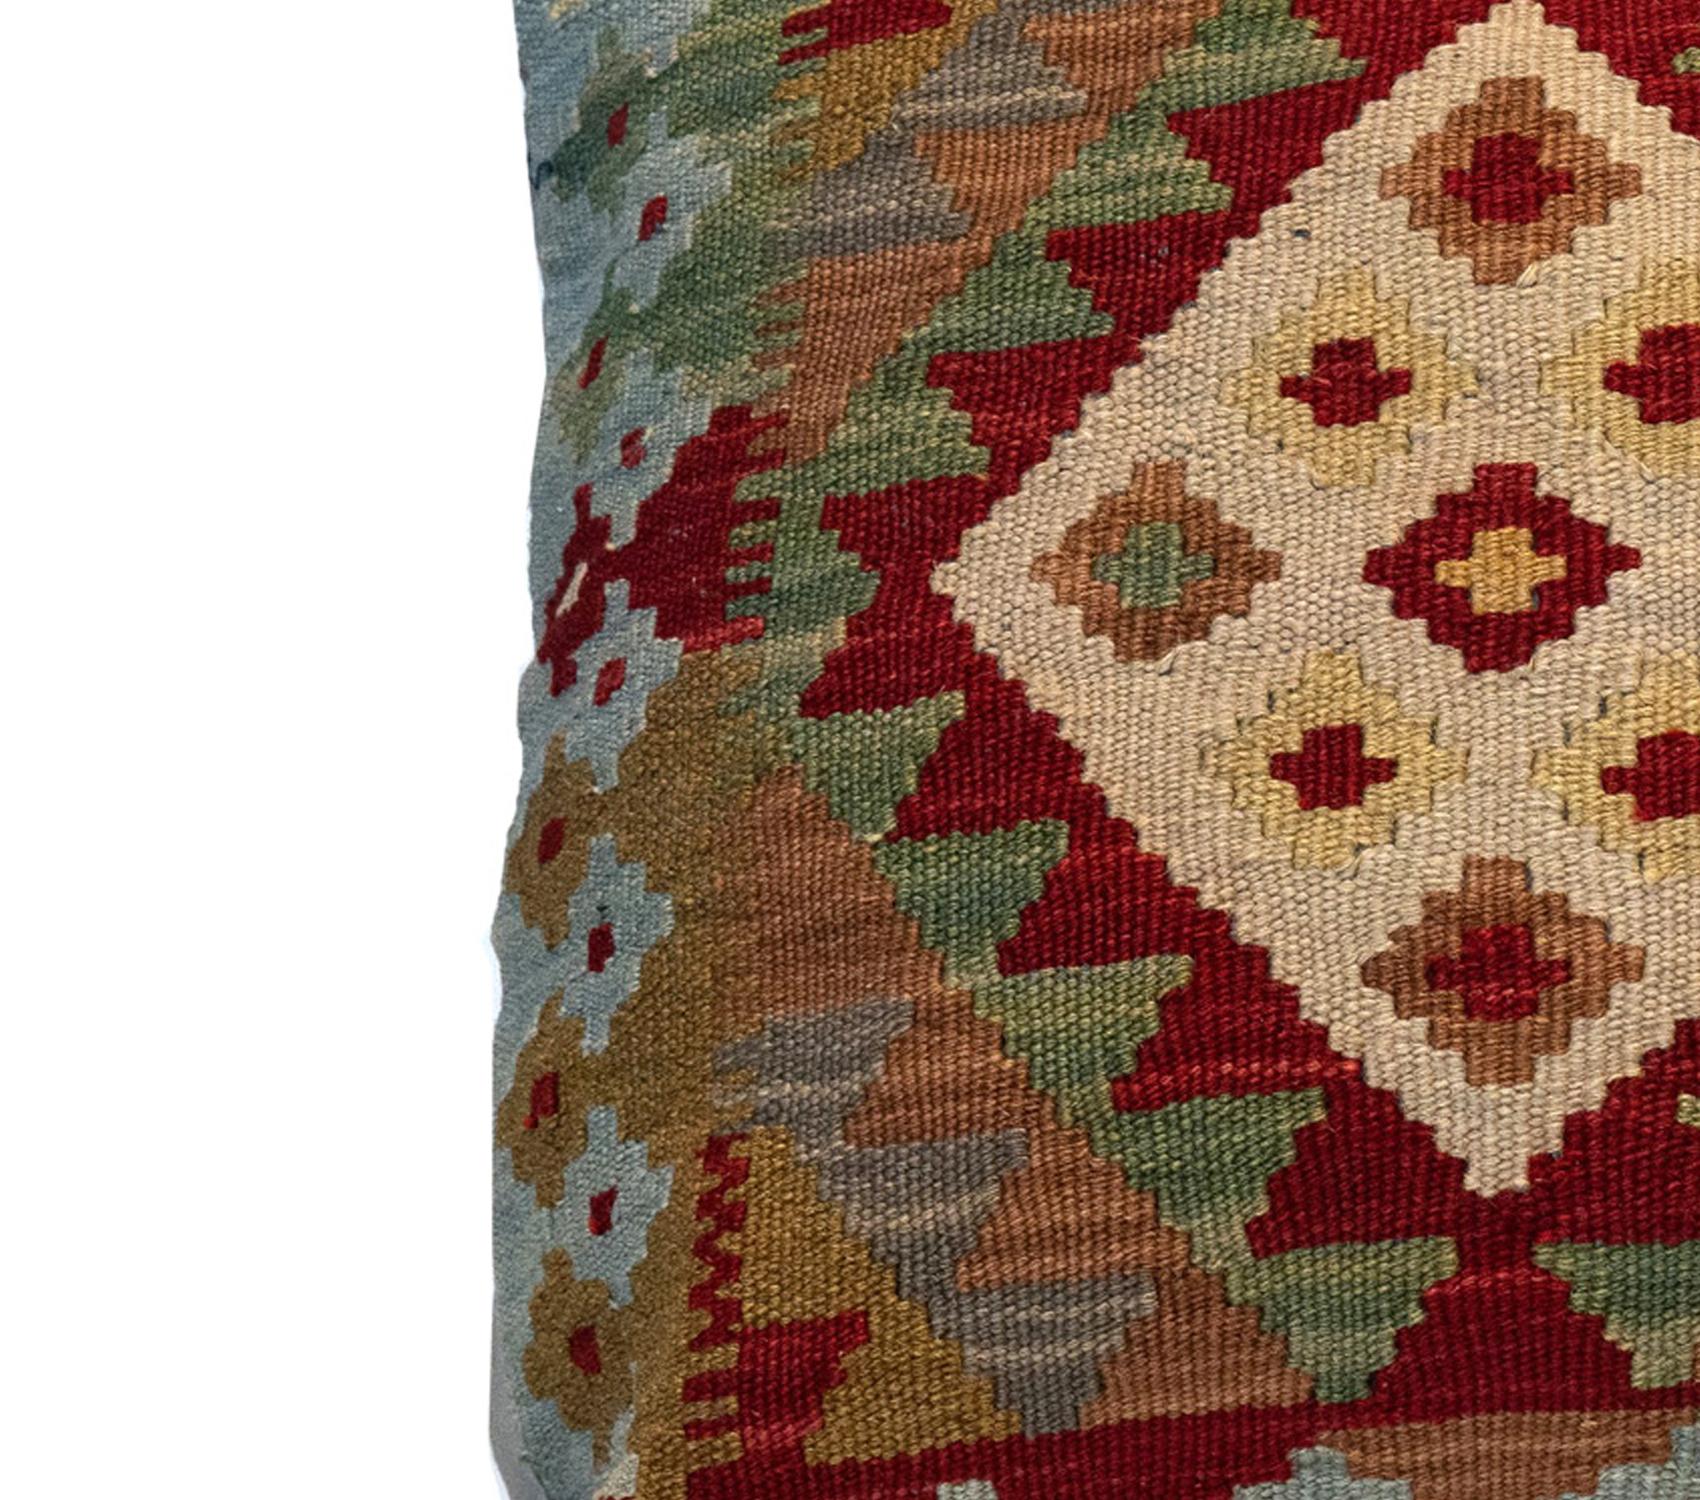 This fantastic cushion has been woven by hand using traditional kilim weaving techniques with hand-spun wool. Featuring a symmetrical geometric pattern woven in beautiful rustic colours. Including olive green, beige-brown and rust red. These elegant